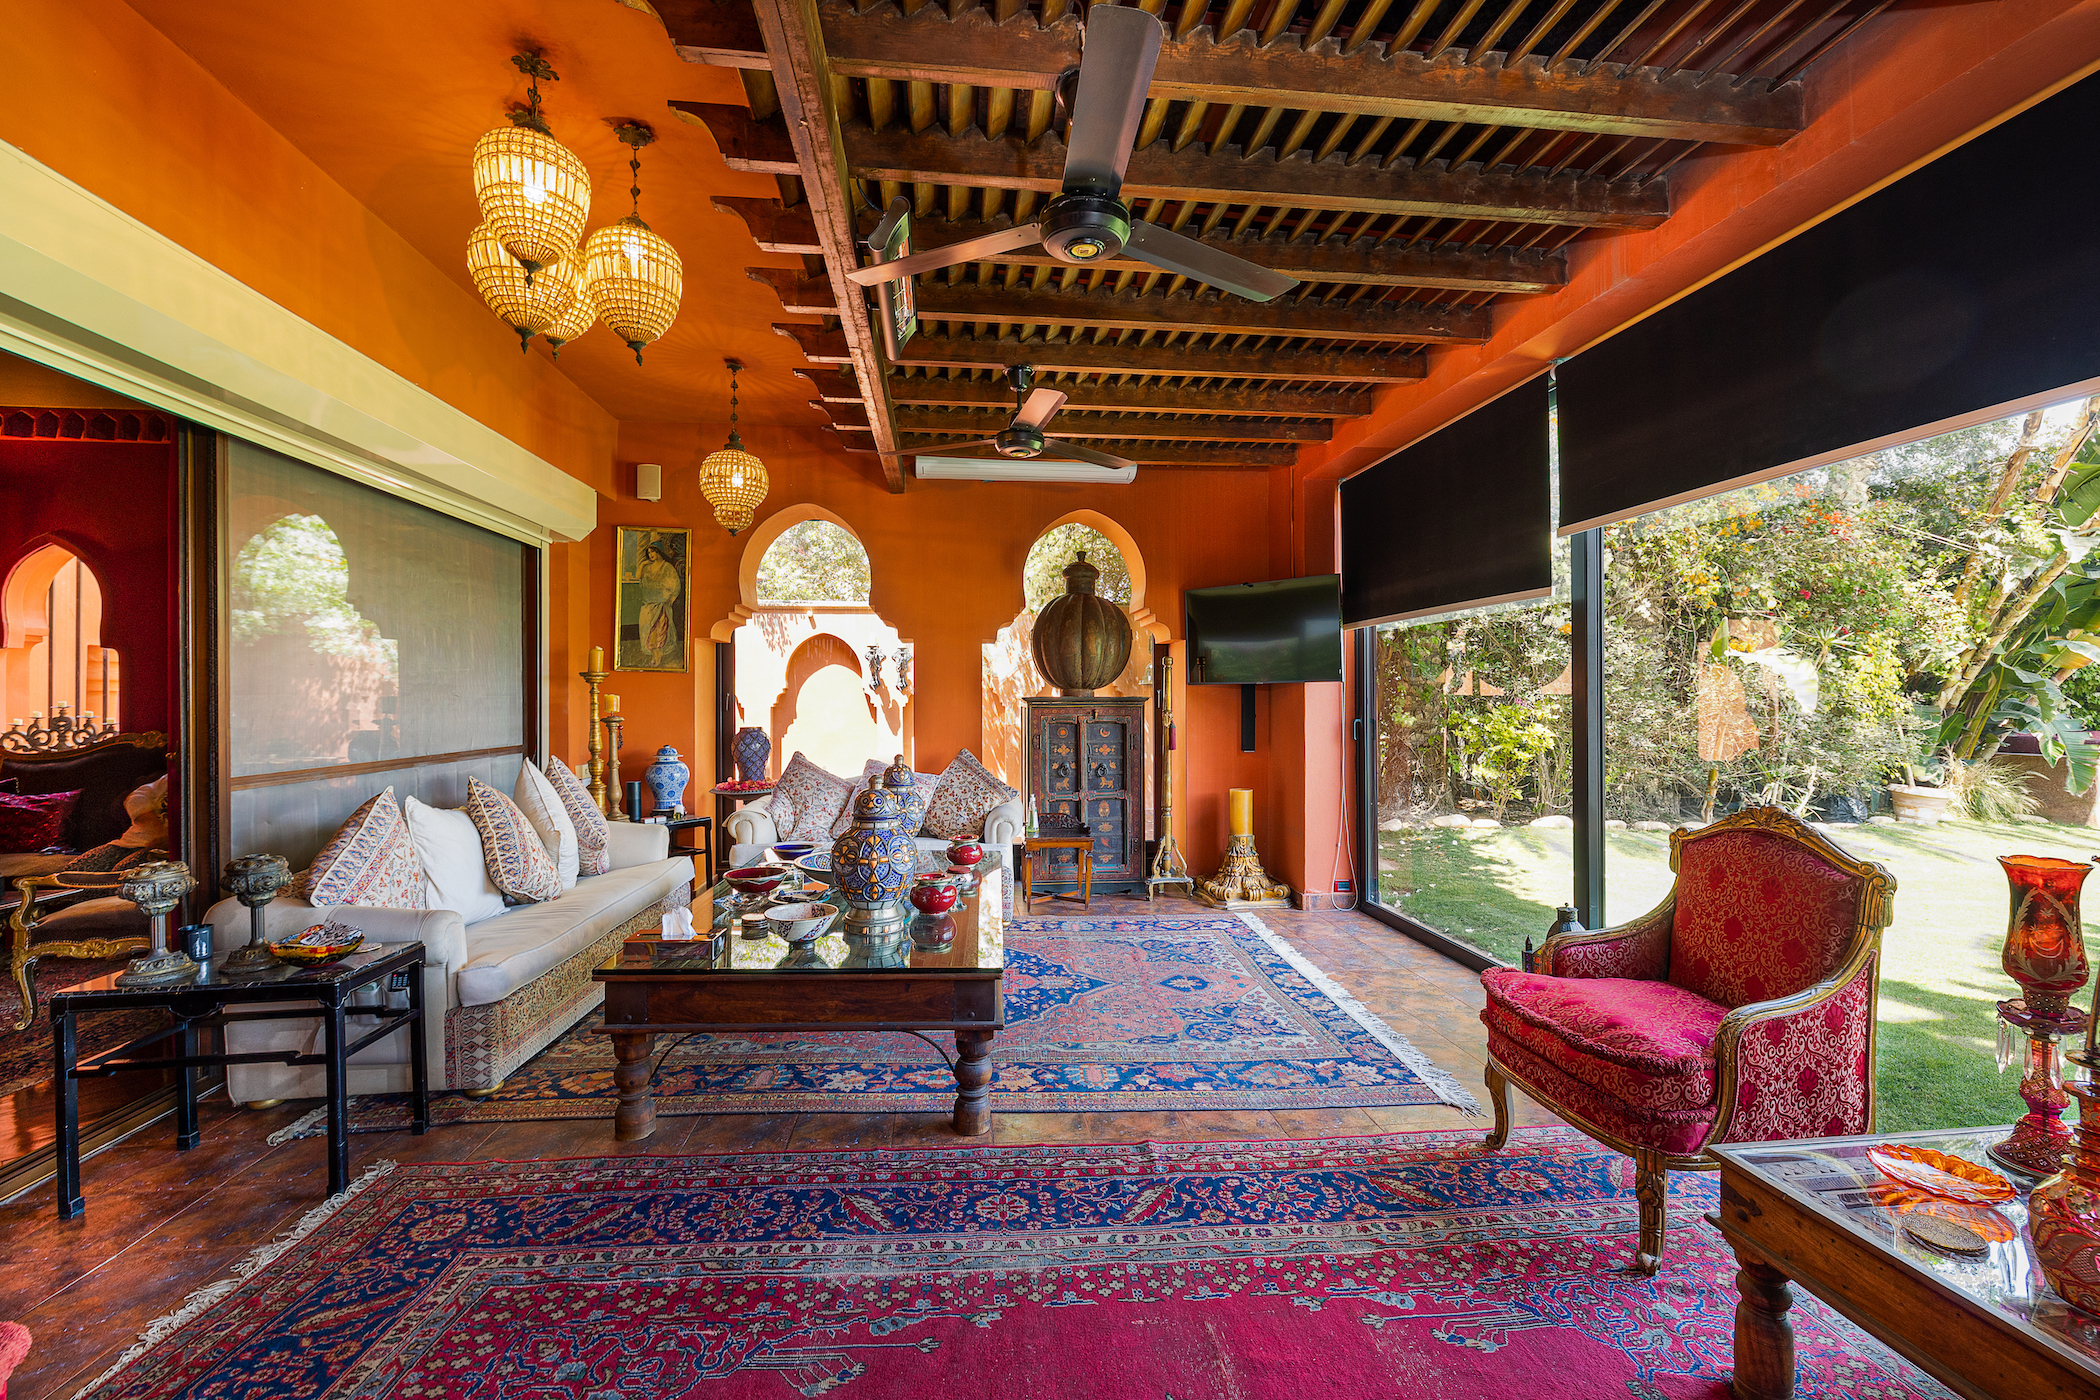 Villa with a View: The Great Pyramids of Giza